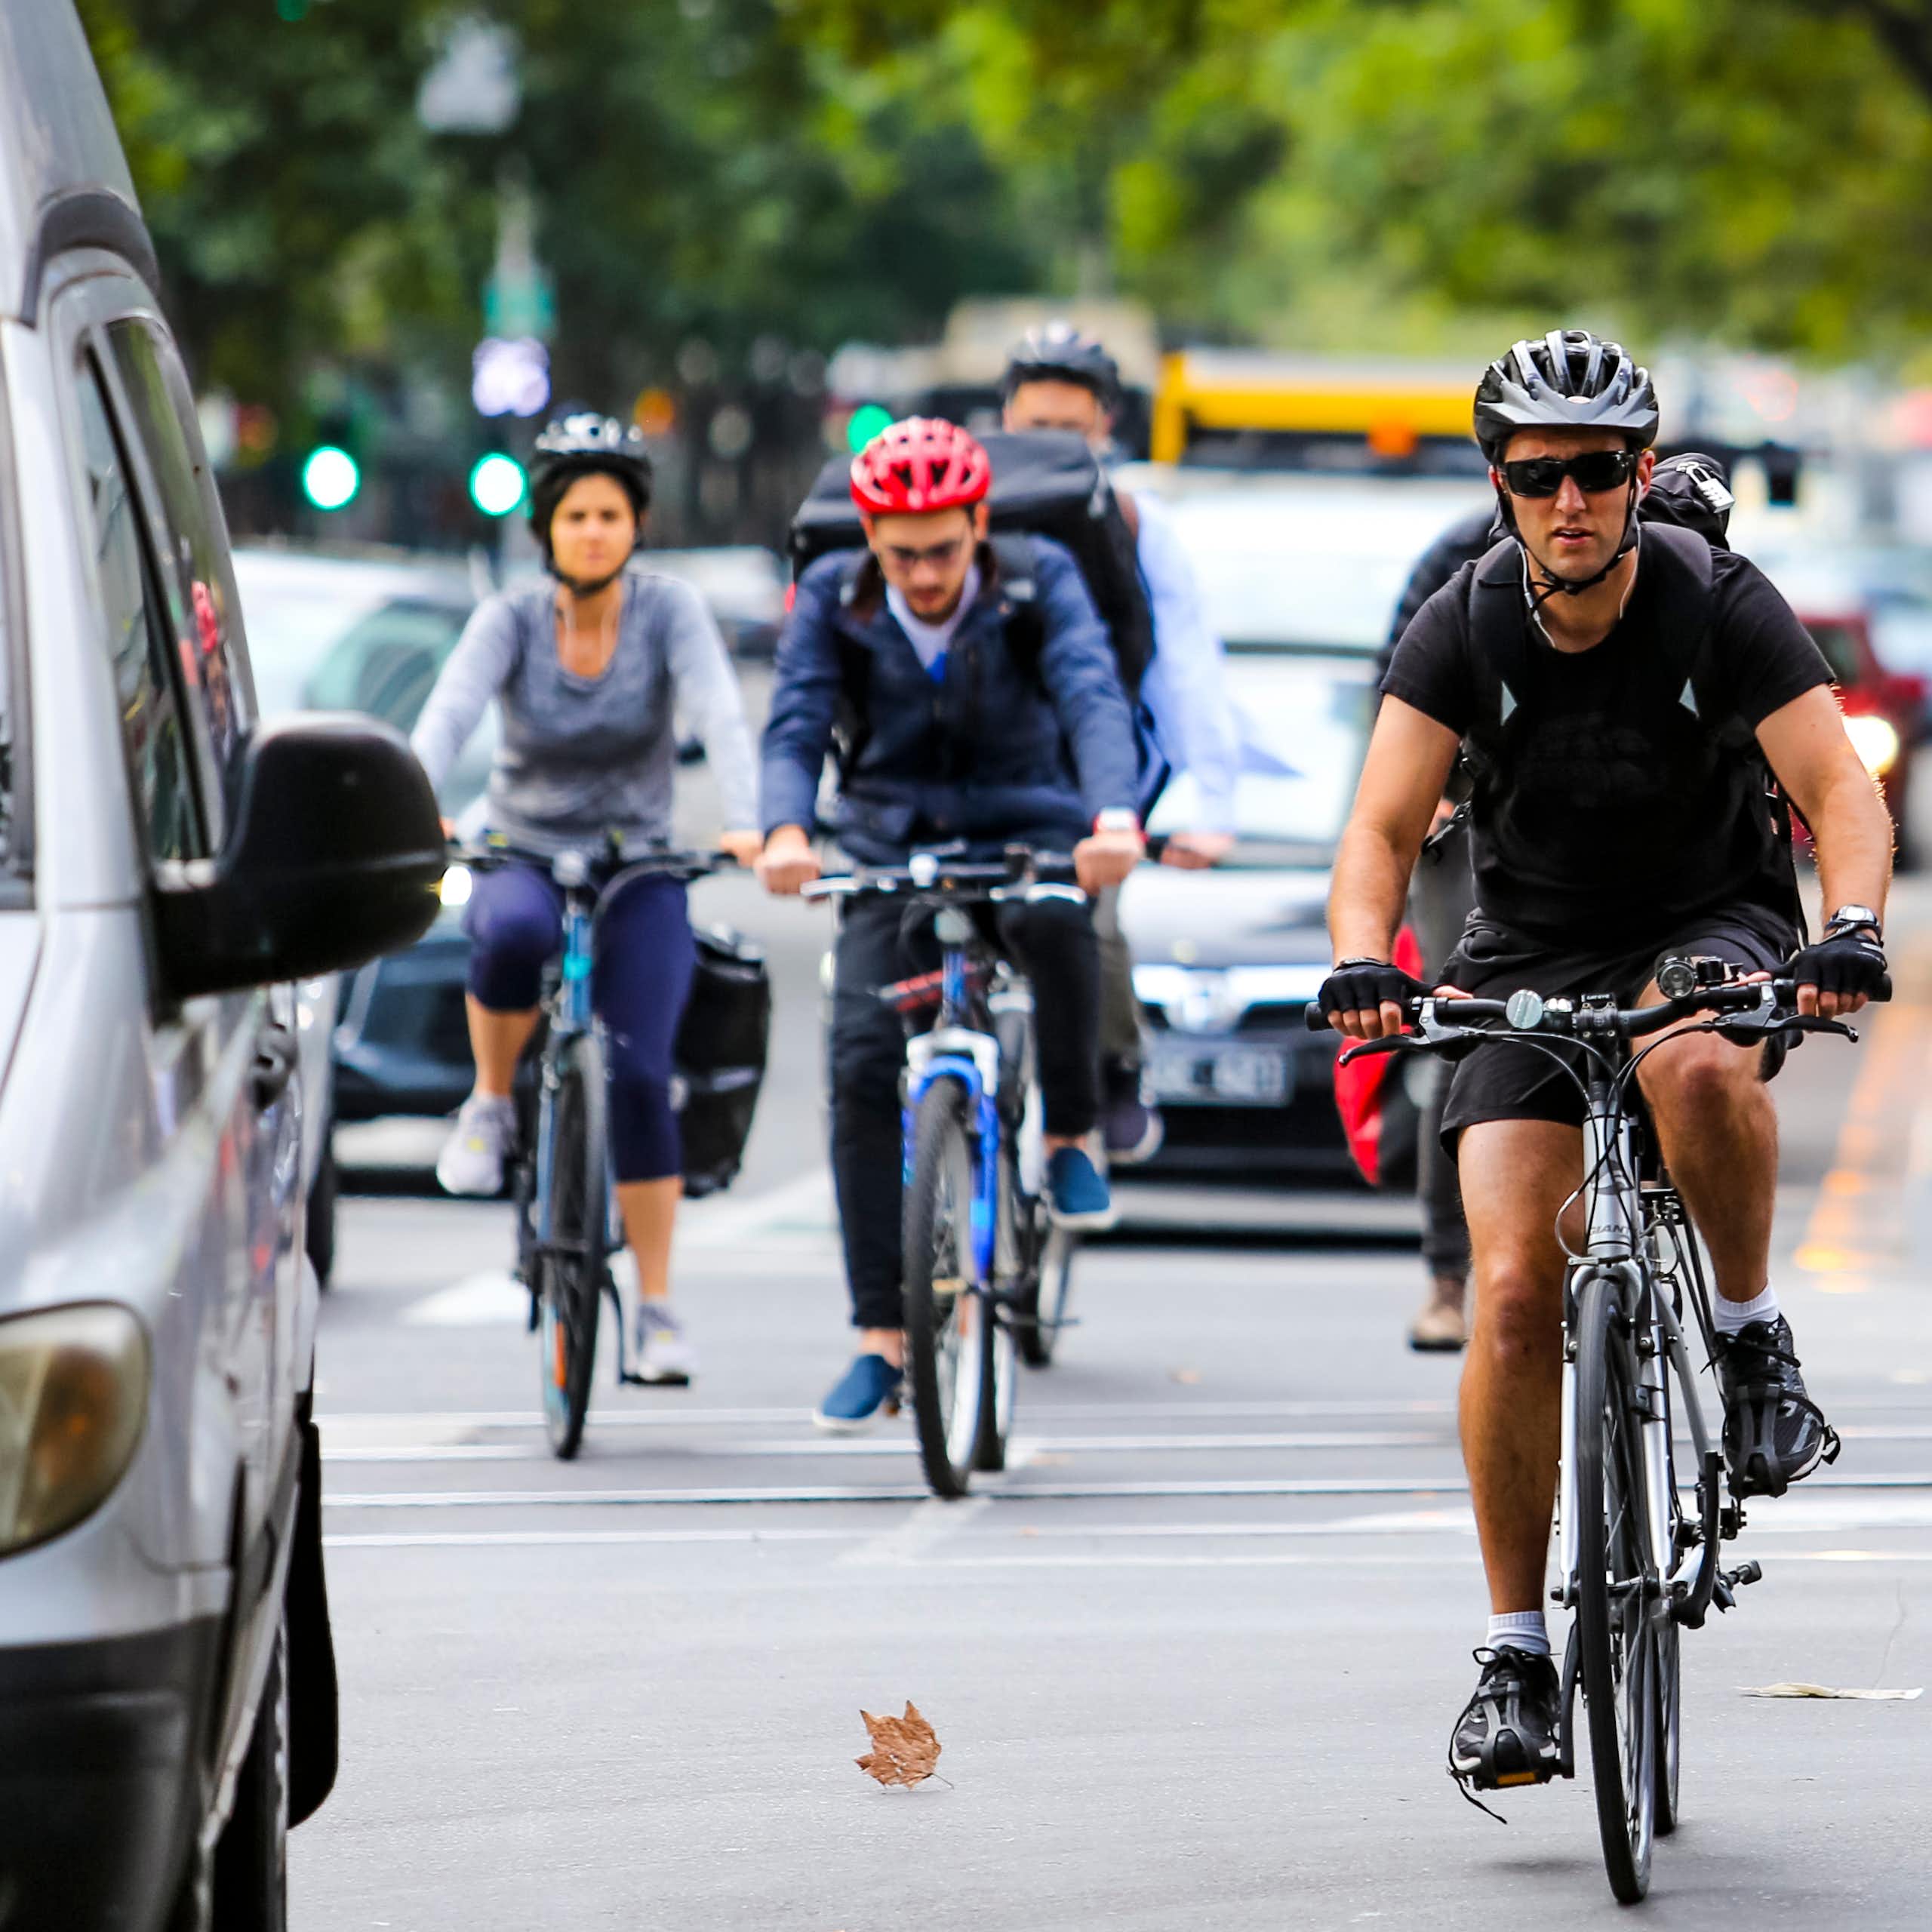 Cyclists commute among the traffic in Melbourne